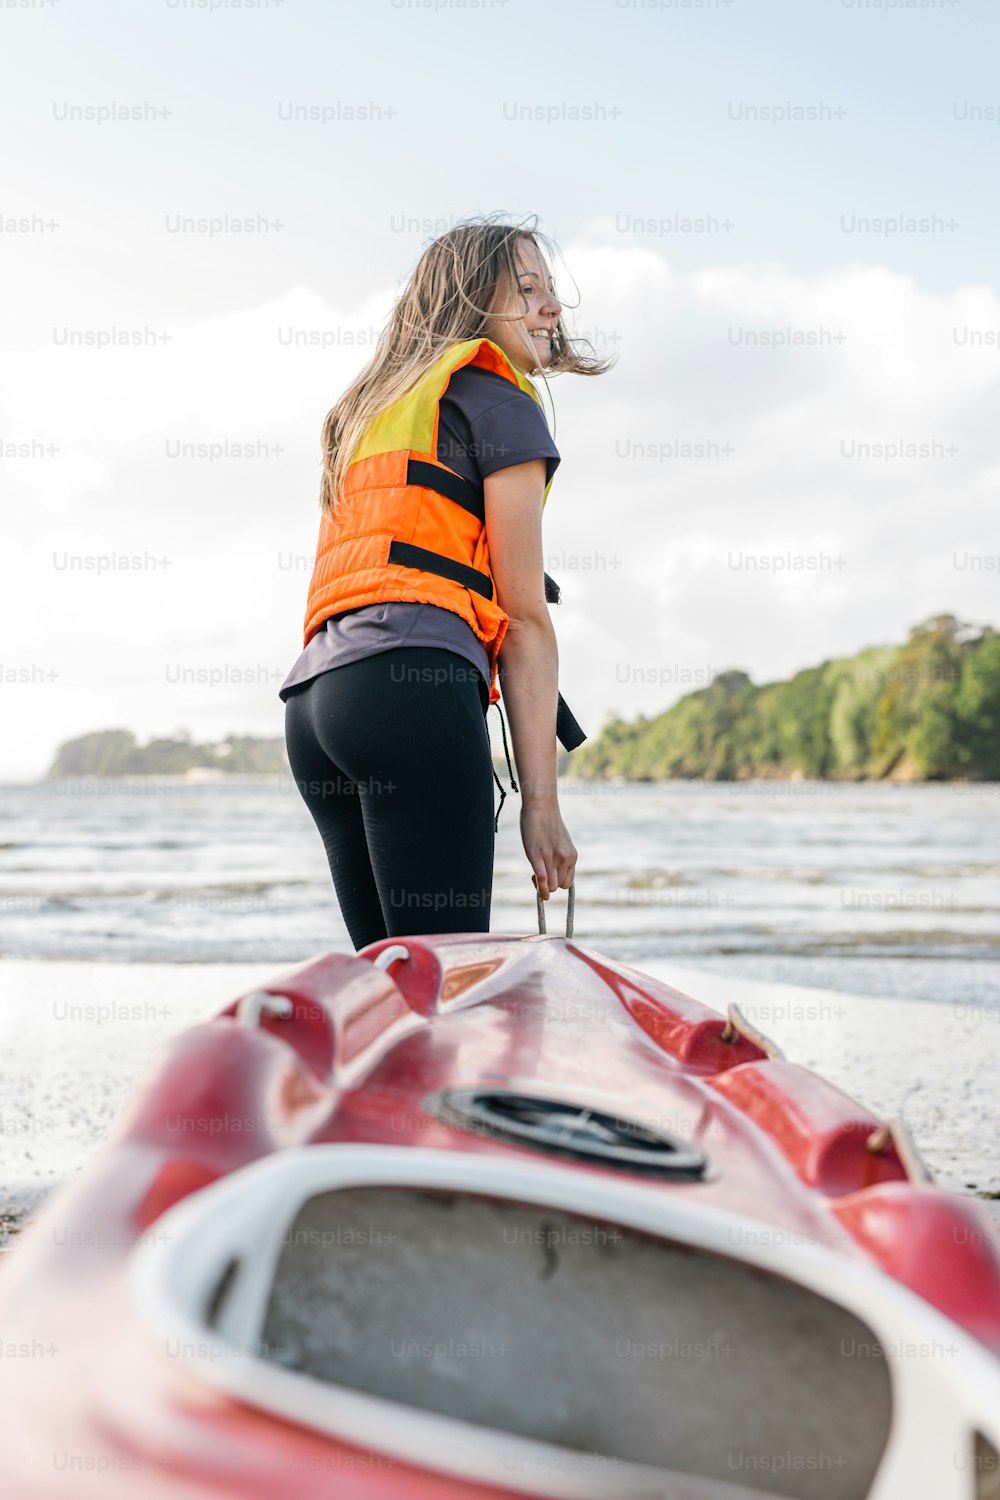 a woman standing next to a red kayak on a beach